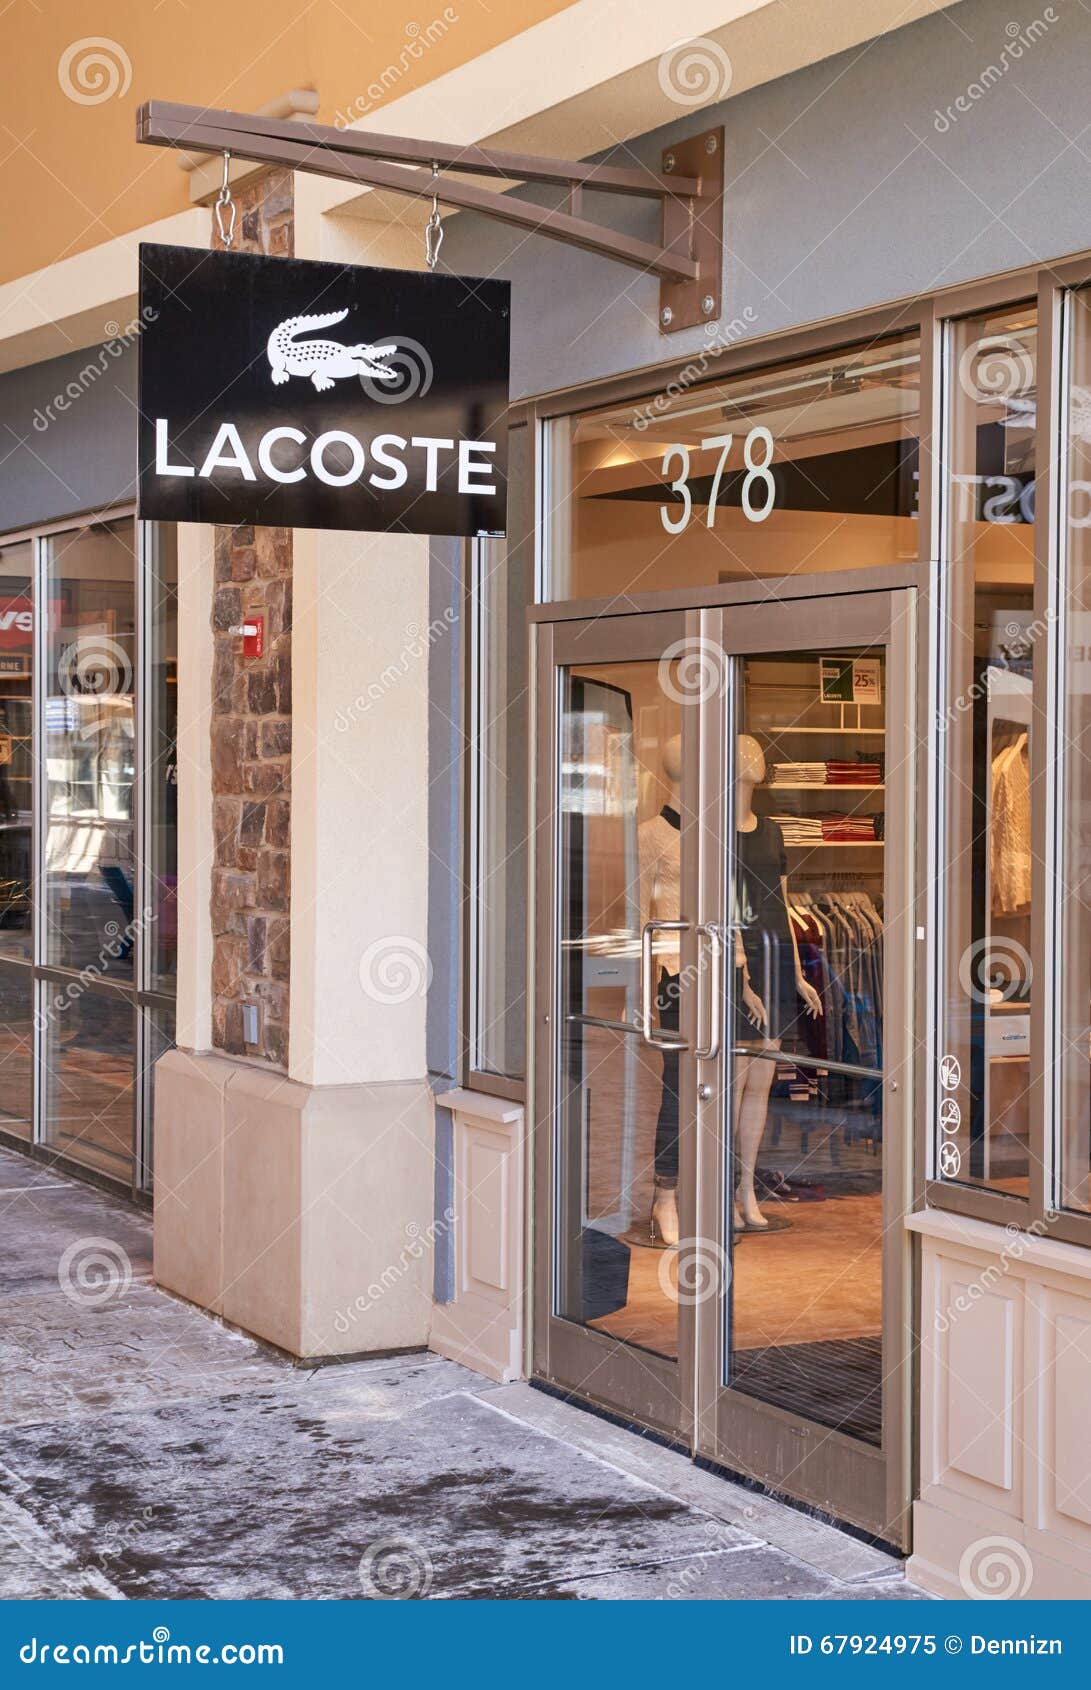 lacoste canada outlet